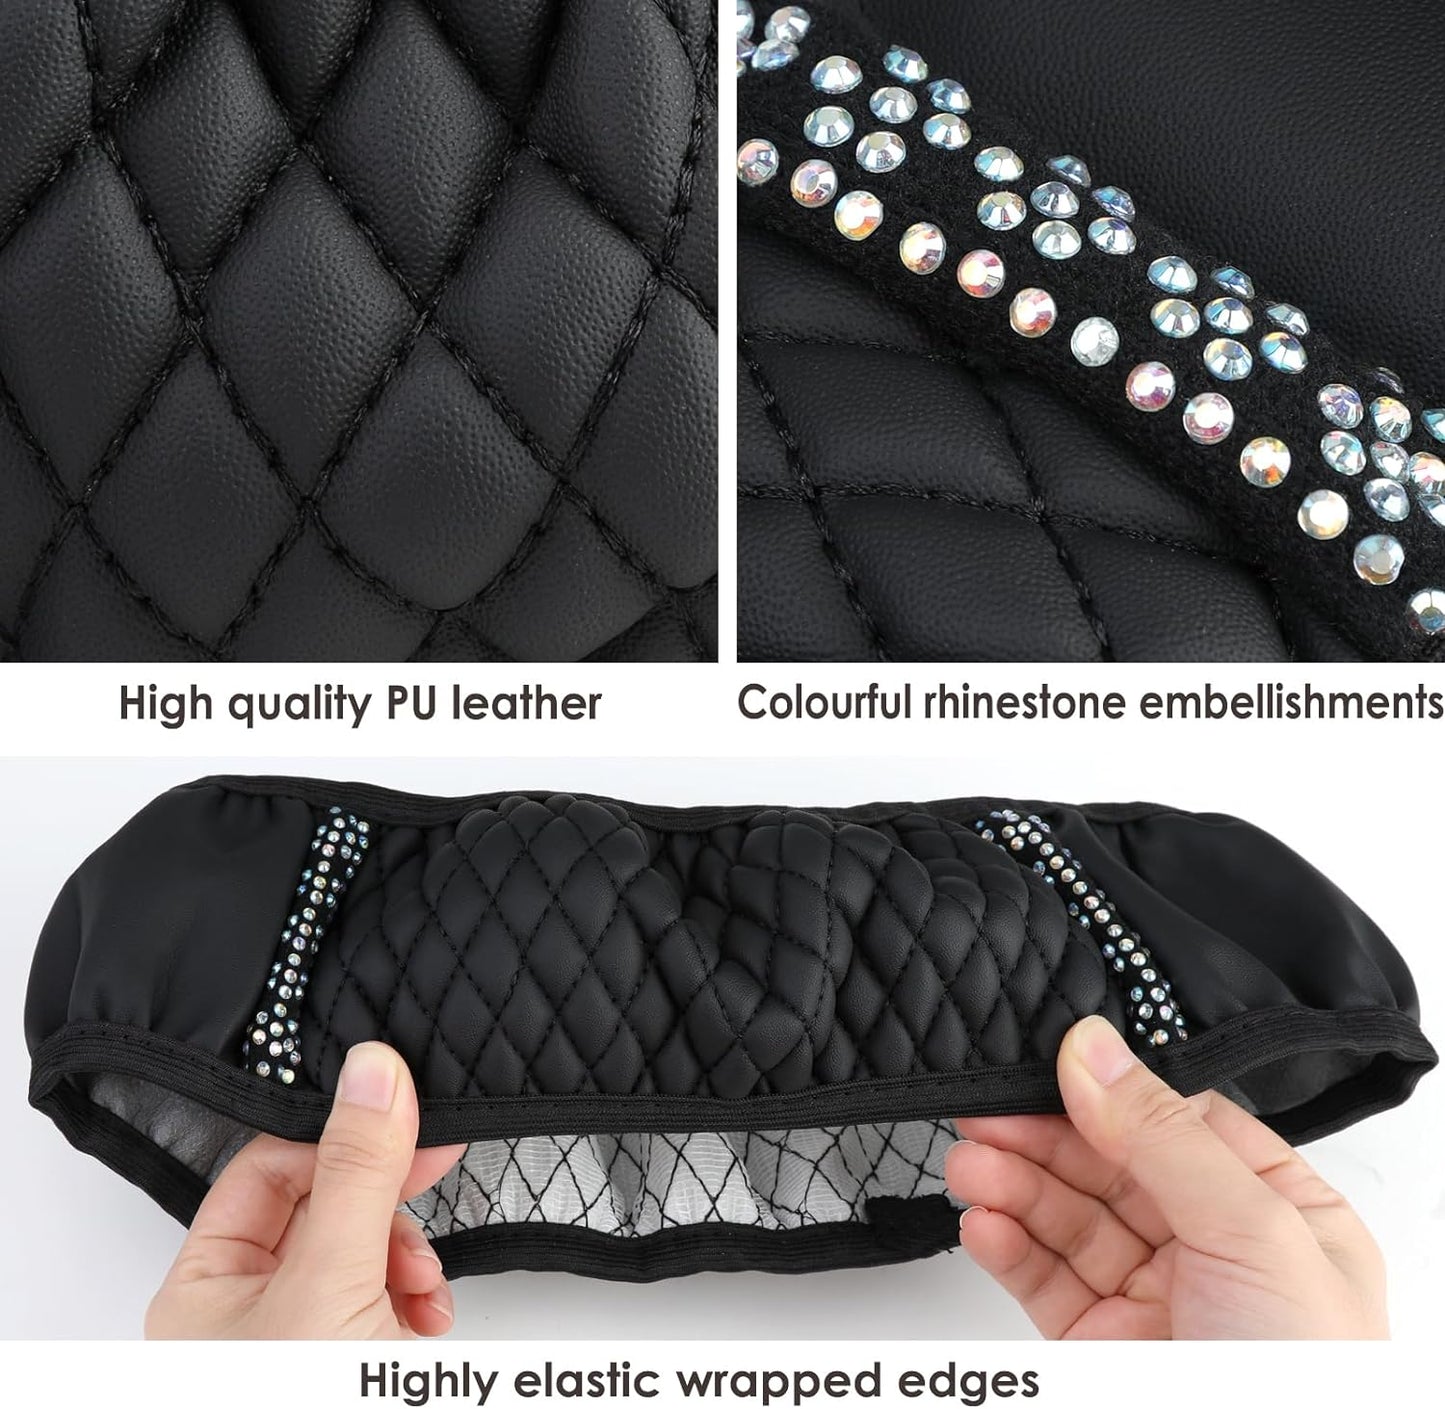 Bling Rhinestones Steering Wheel Cover 15 Inch Colorful Crystal Diamond Sparking Auto Elastic Protector Automotive for Women Girls Car Accessories for Most Cars Interior Decor (Black)